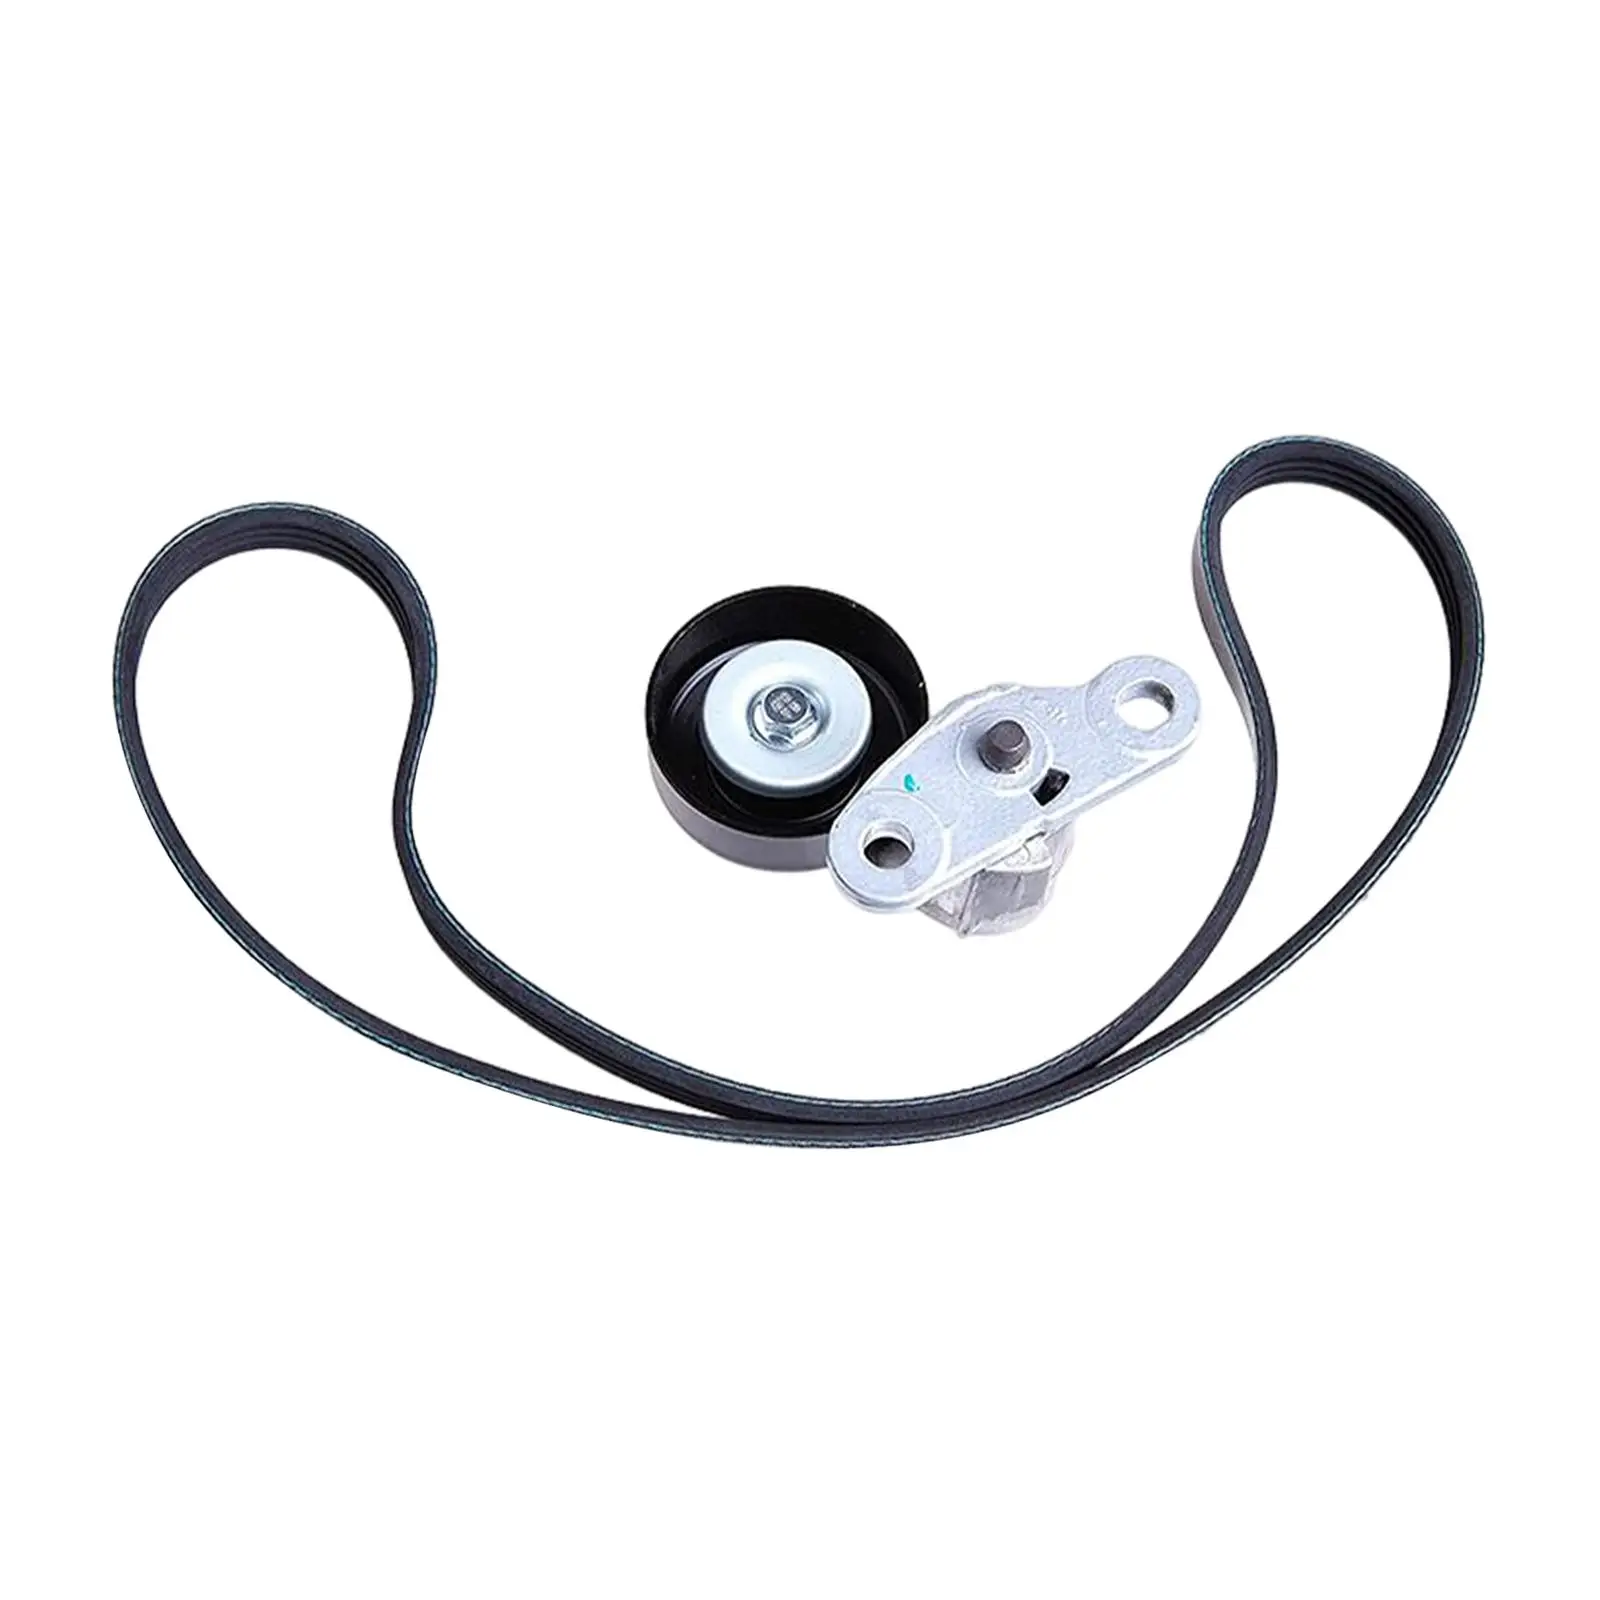 Complete Serpentine Belt Drive Component Kit Replace Part Ack040378HD for Chevrolet Avalanche Auto Accessories Professional